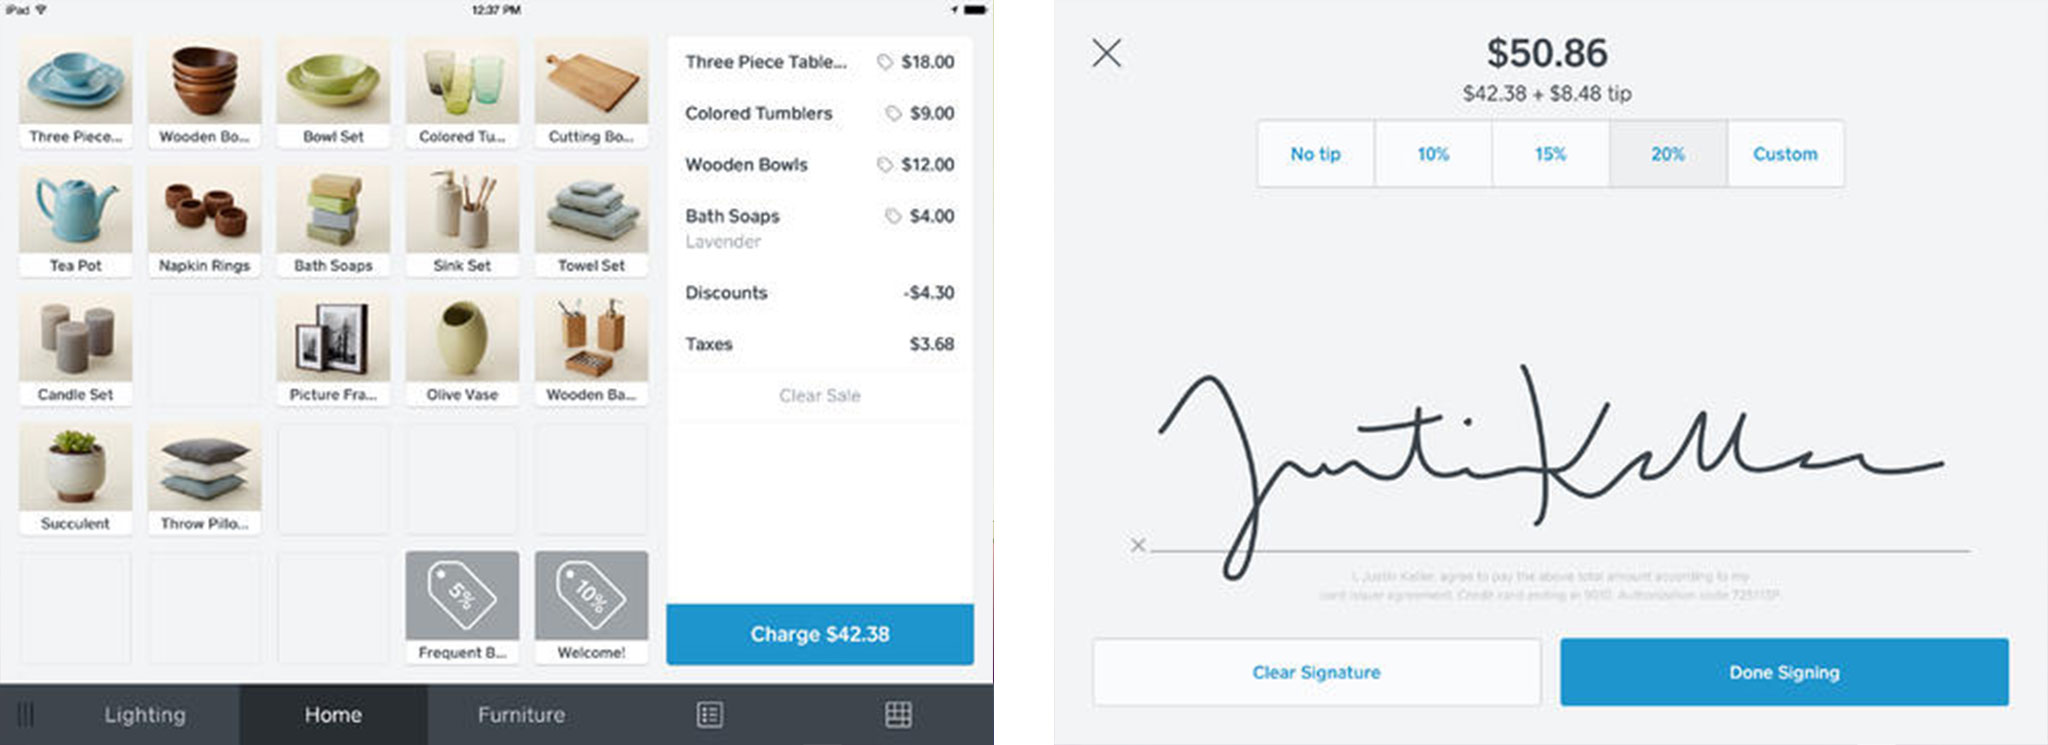 Best point of sale apps for iPhone and iPad: Square